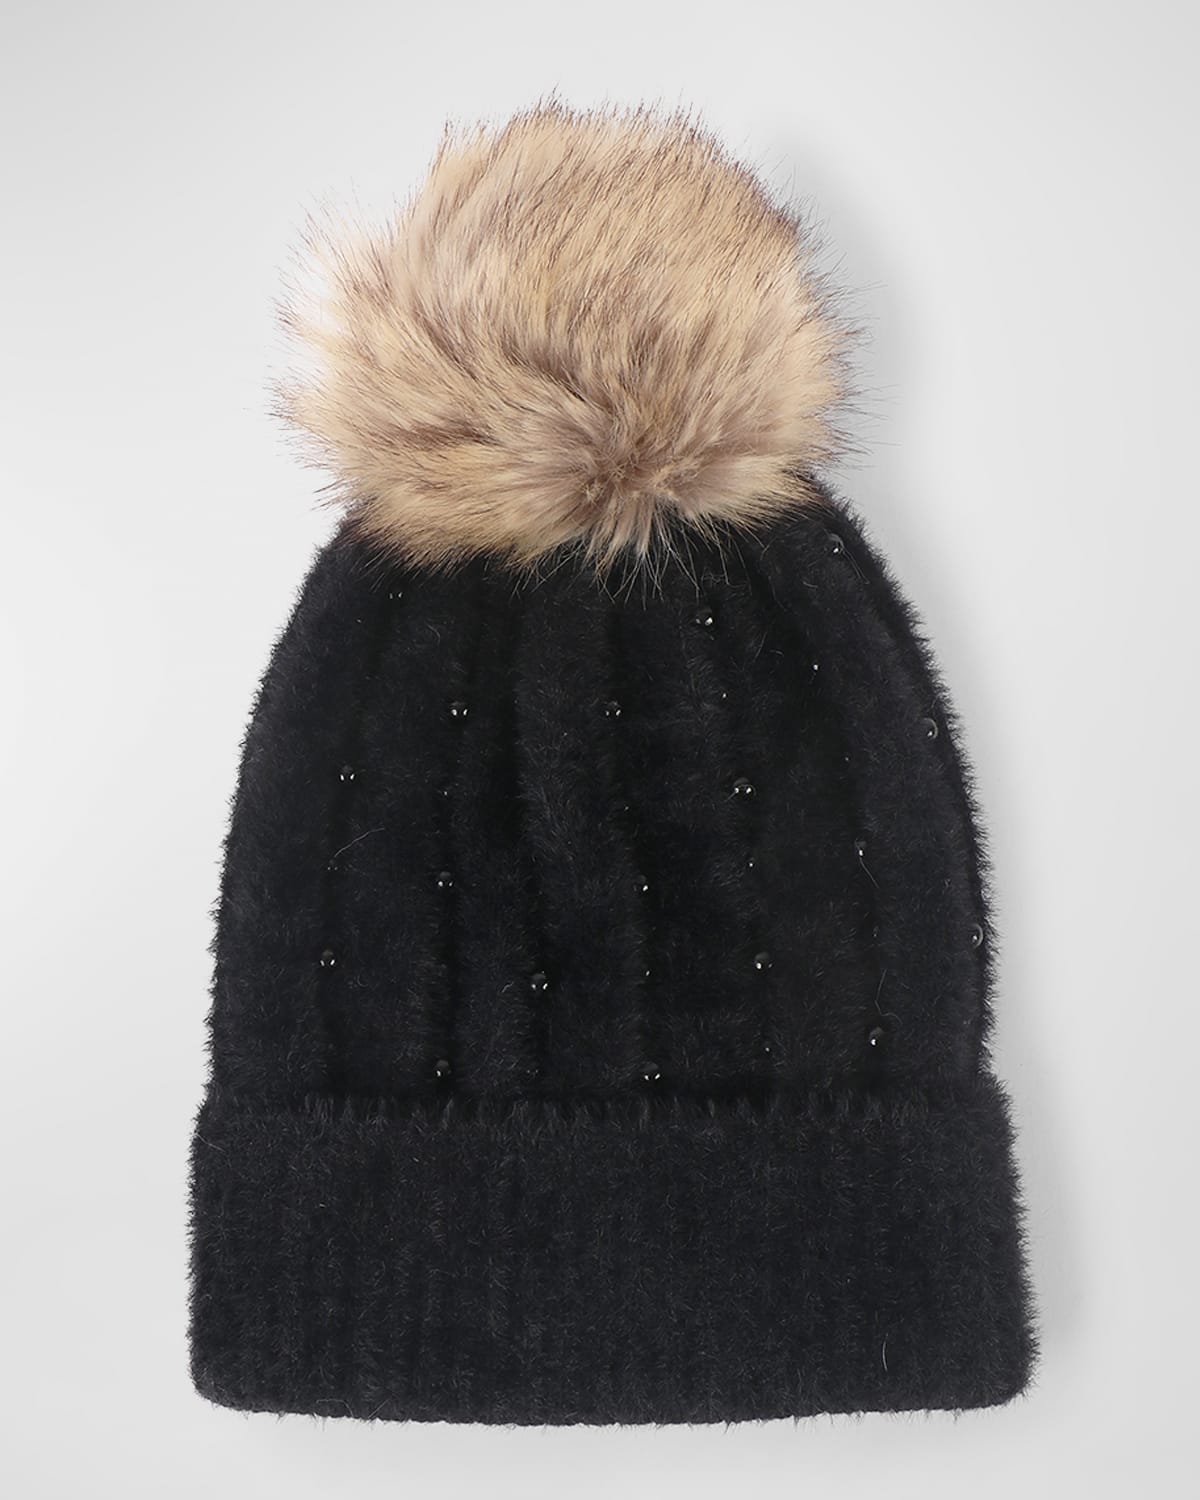 Laurie Sequin-Embellished Pom Beanie